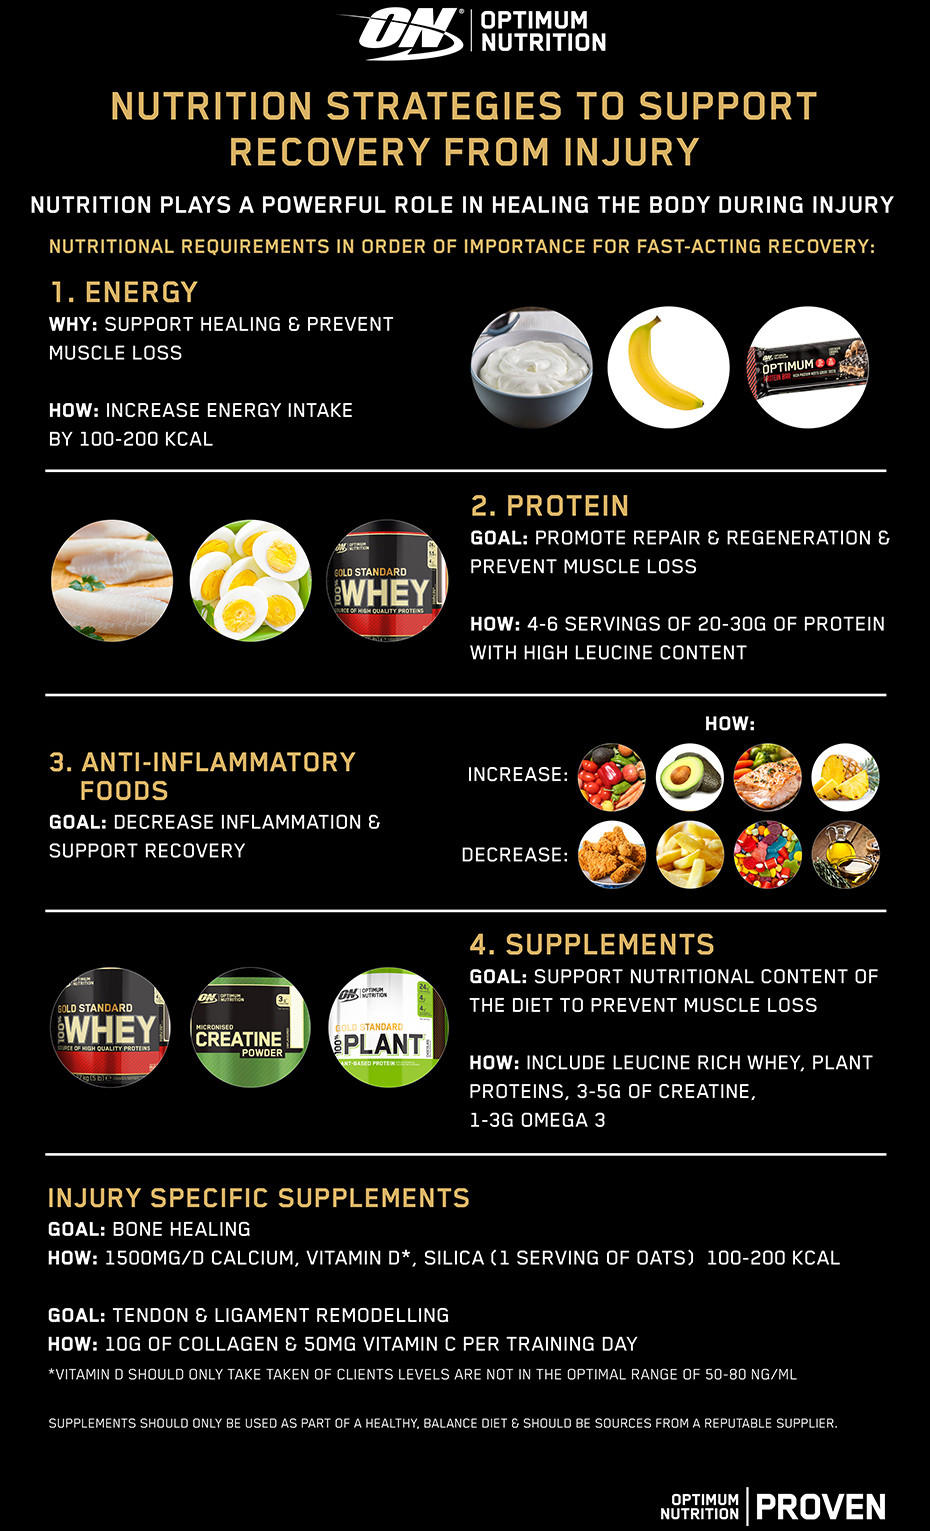 Nutrition strategies for faster injury healing